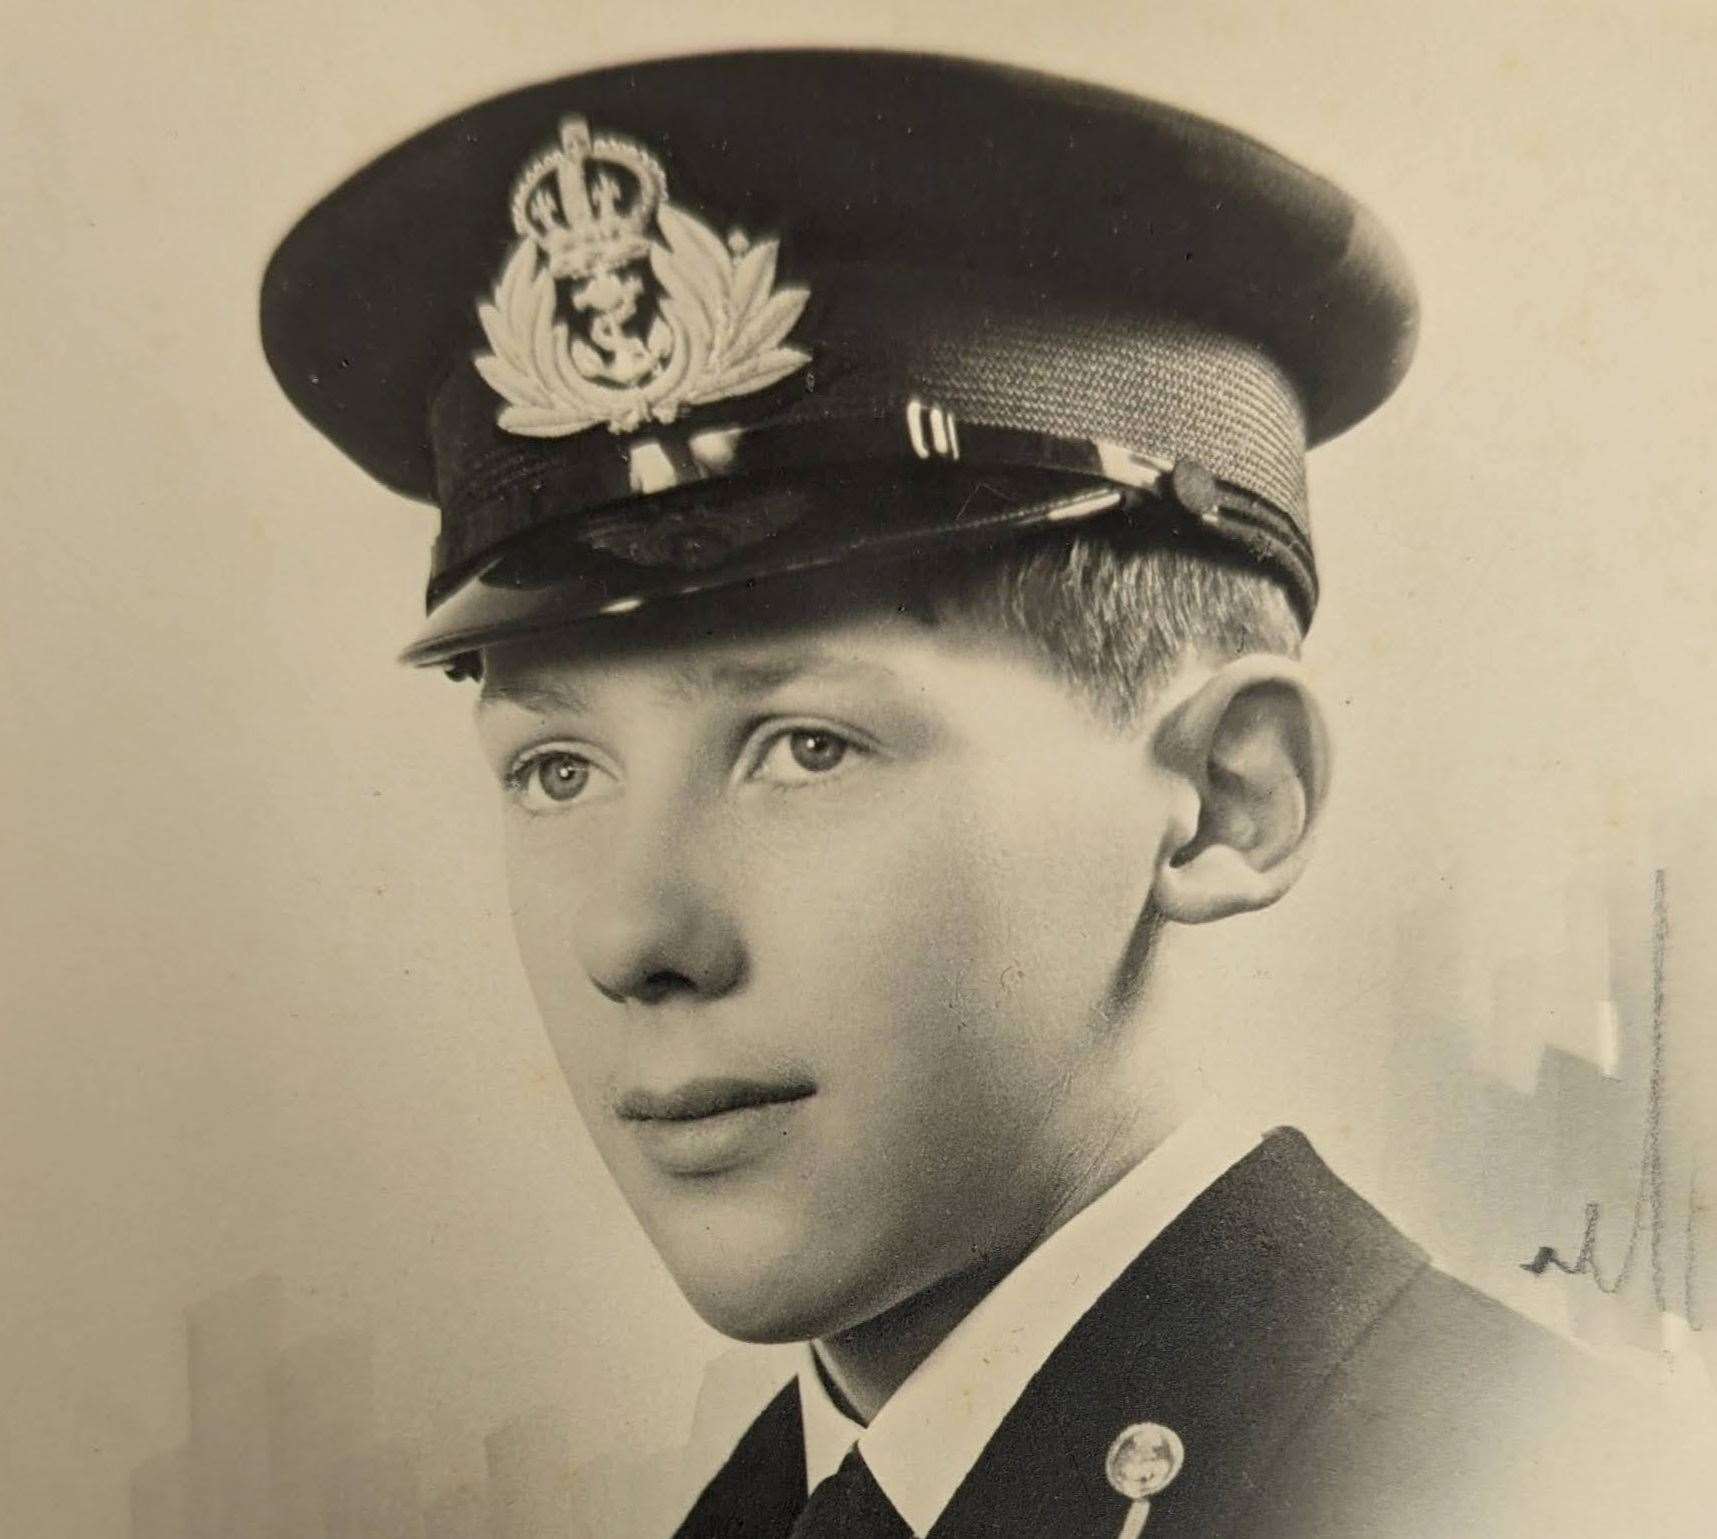 John Roberts joined the Royal Navy as a cadet aged just 13. Picture: John Roberts